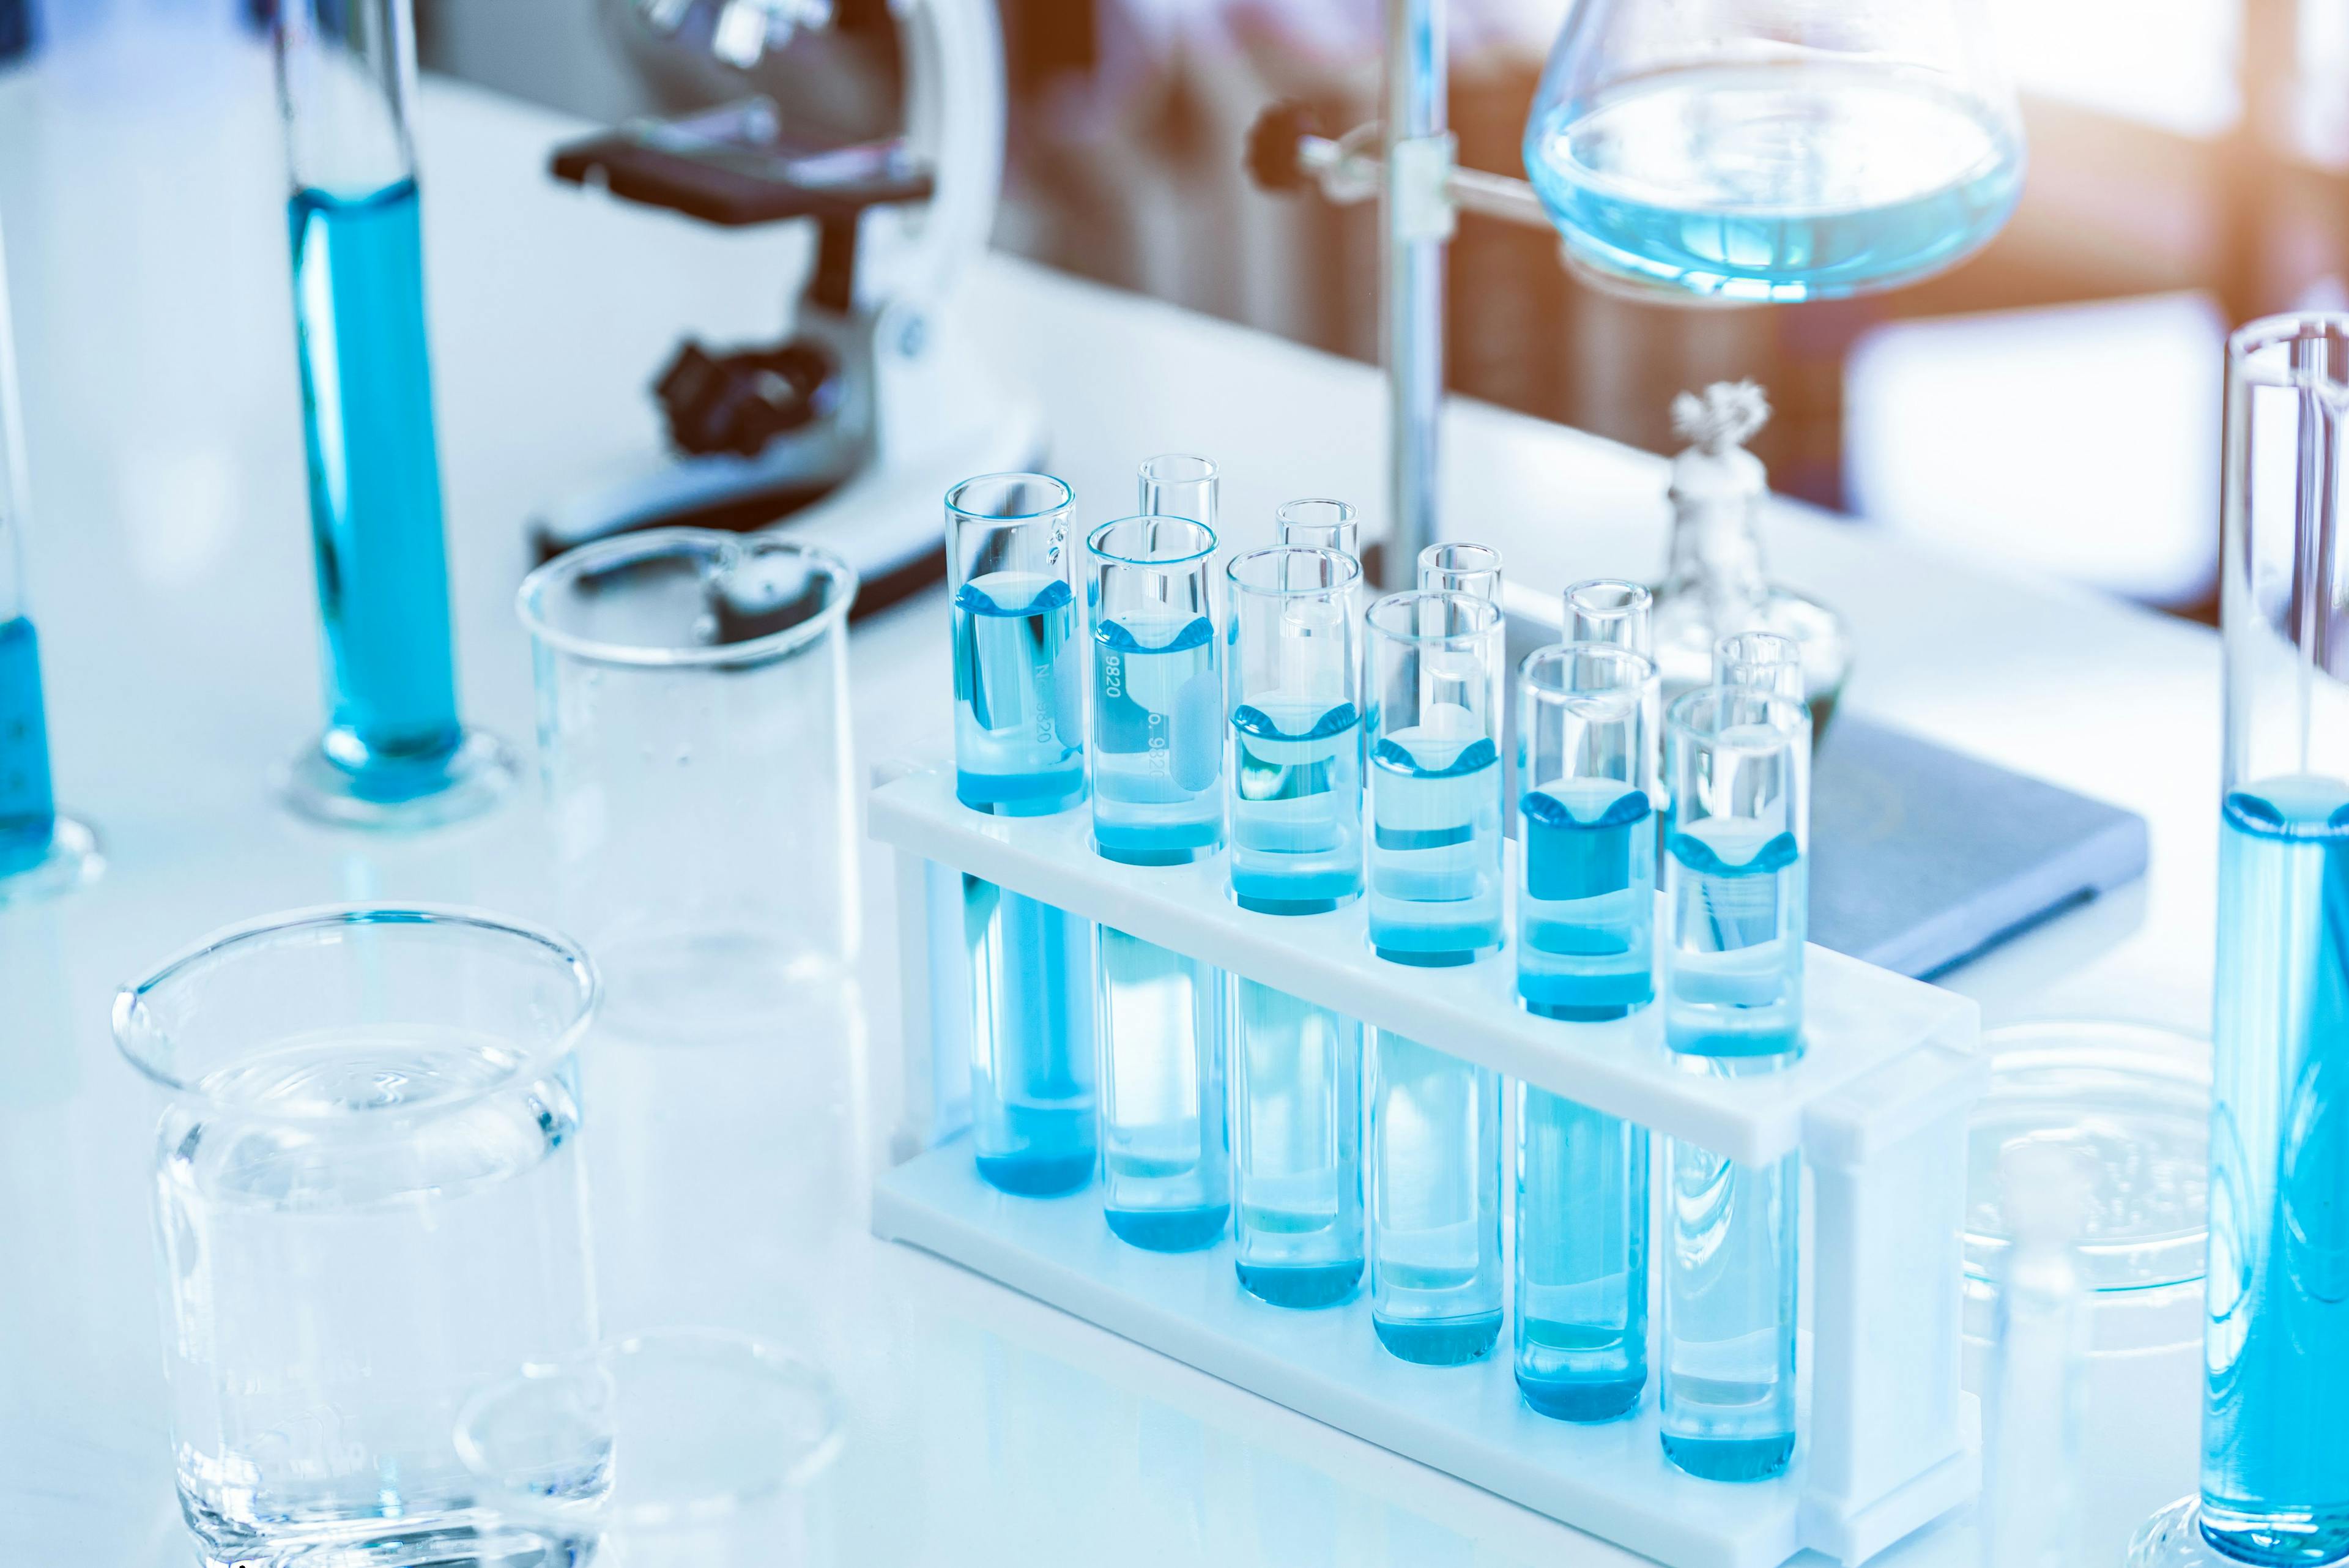 It is important that all stakeholders be aware that a biosimilar with the interchangeability designation is not a better biosimilar. Image Credit: Adobe Stock - Shutter2U